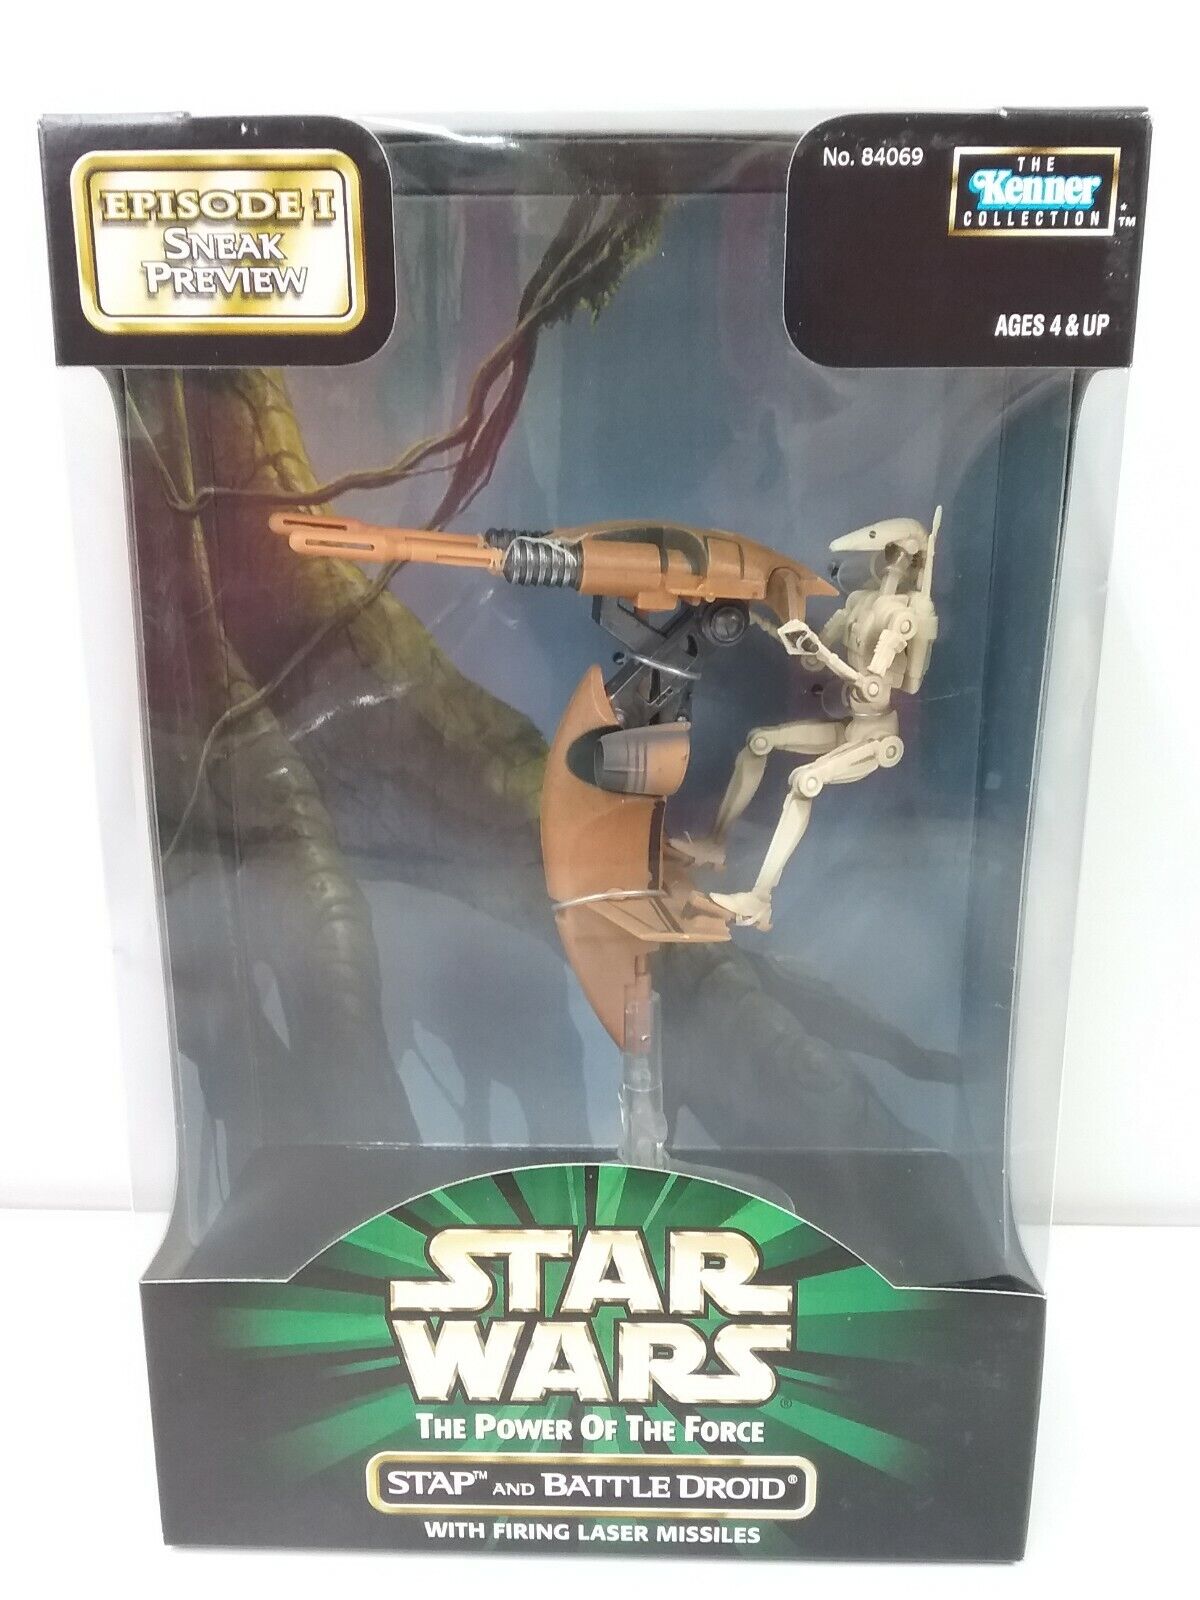 Kenner Star Wars Stap And Battle Droid Potf Action Figure for sale online